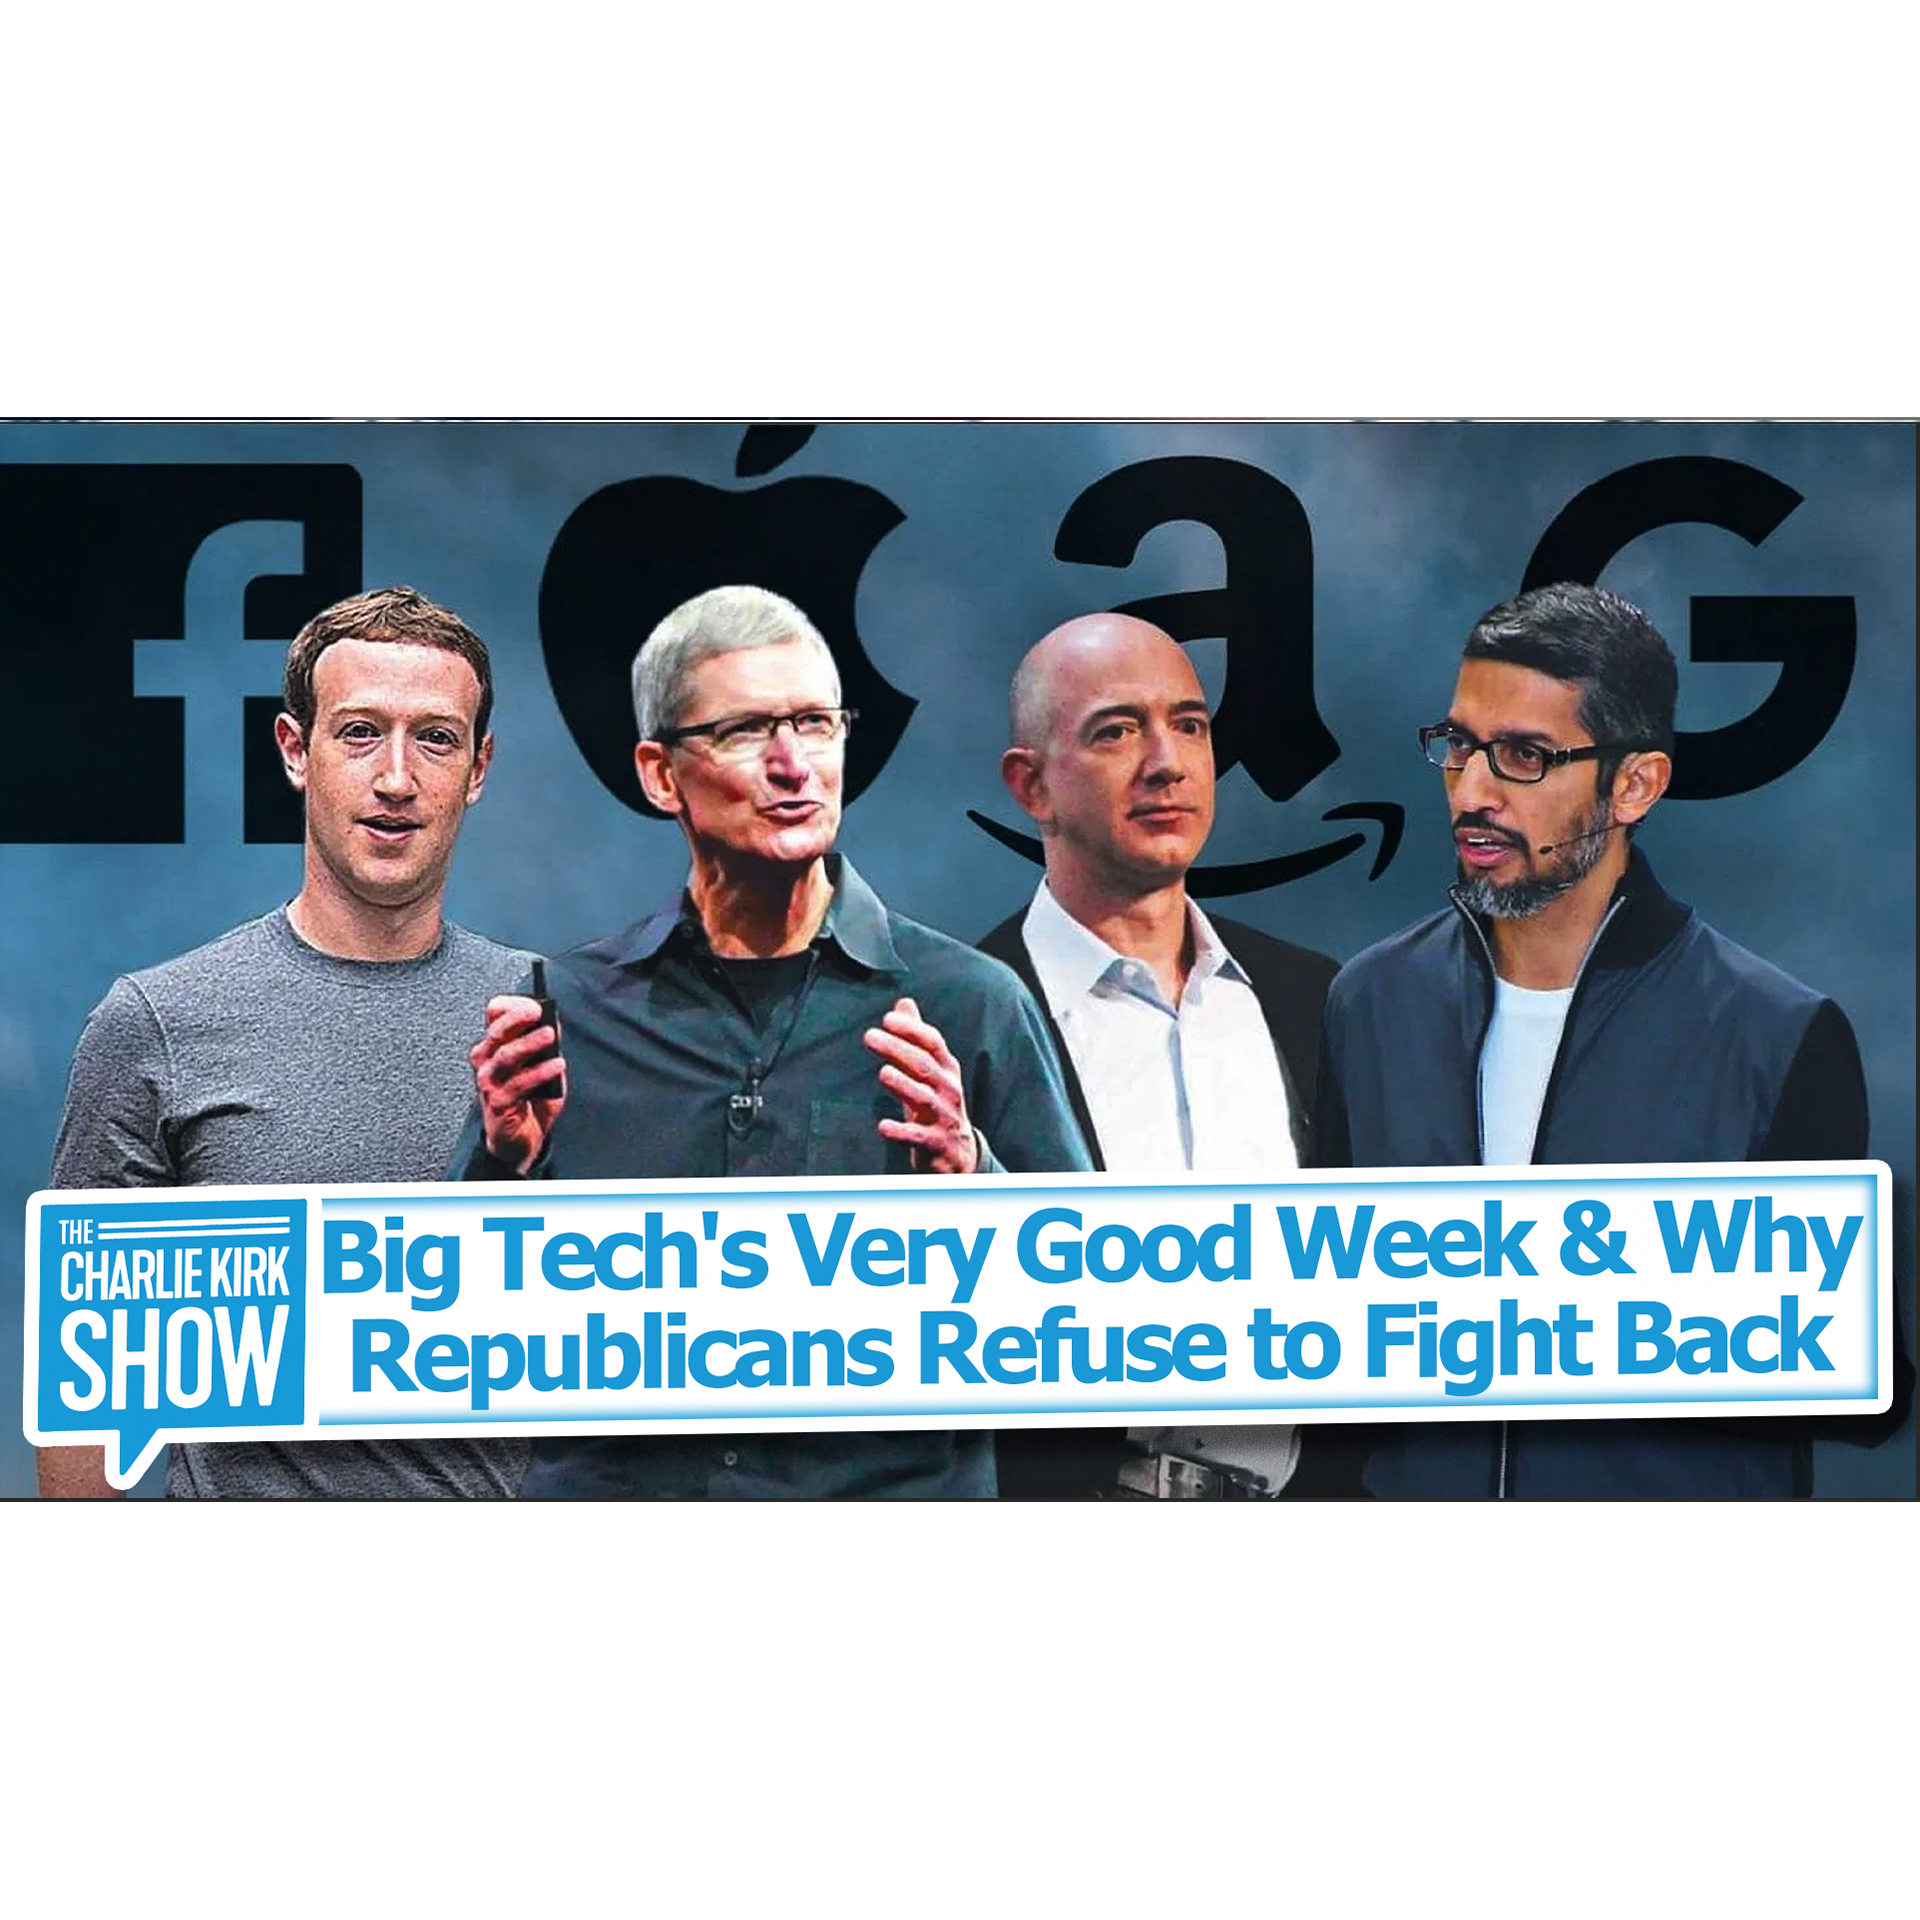 Big Tech's Very Good Week & Why Republicans Refuse to Fight Back